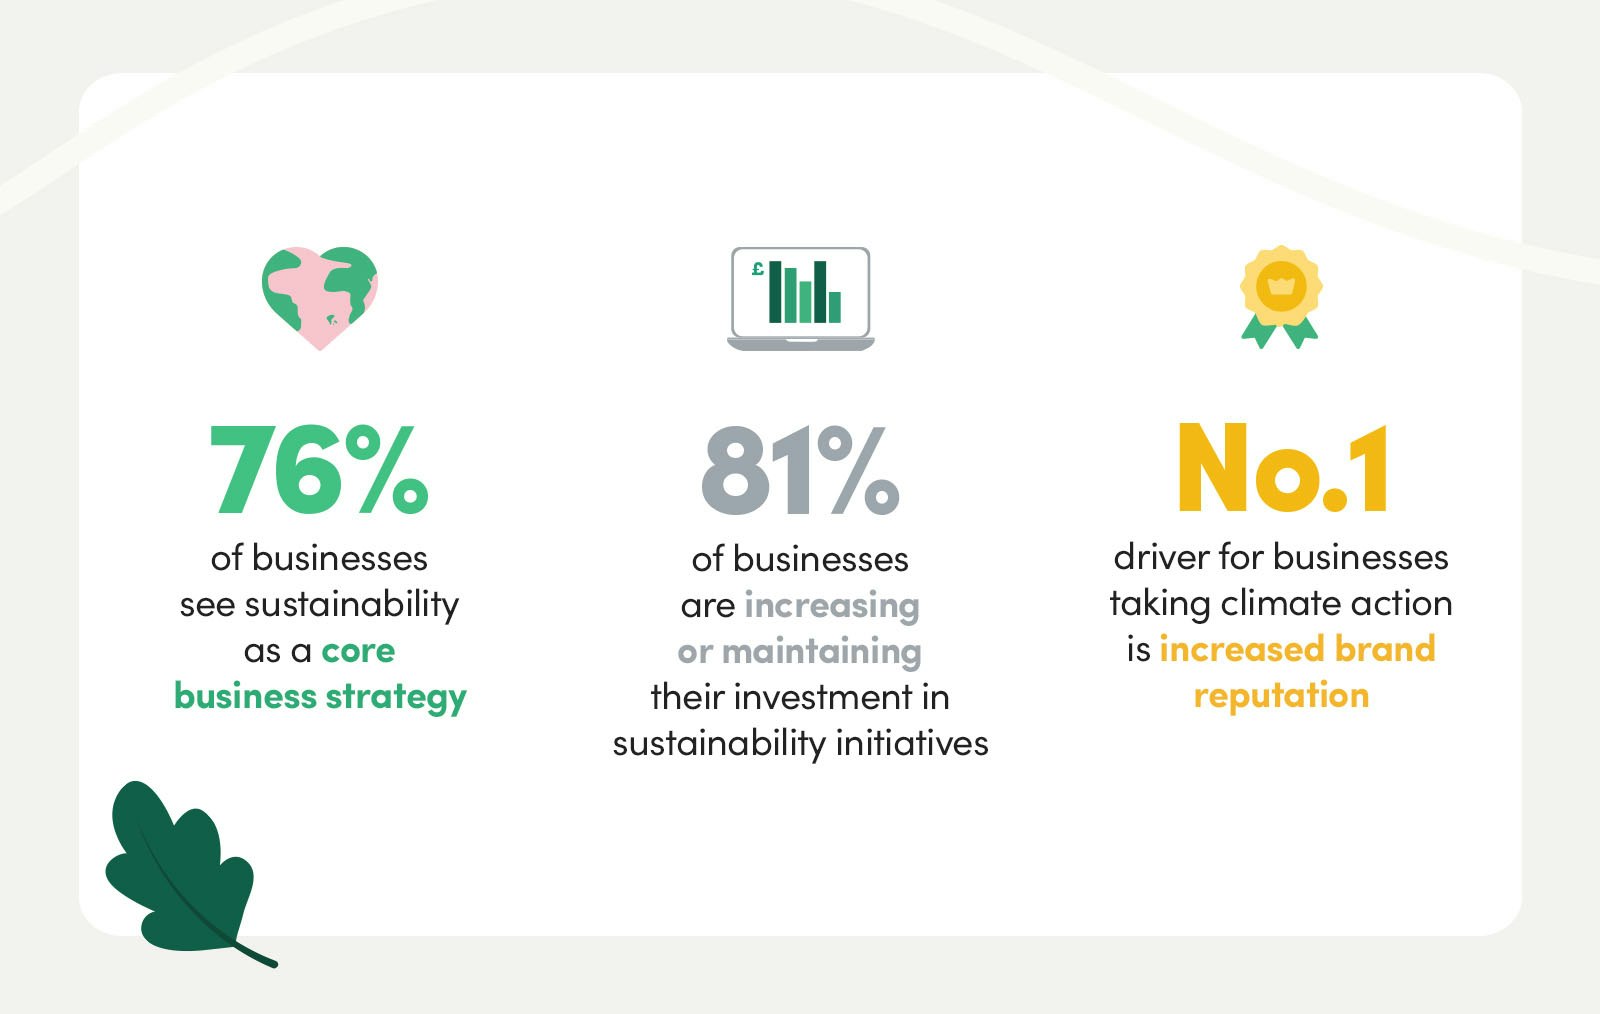 76% said becoming more environmentally sustainable is a core business strategy for their organisation in 2024.